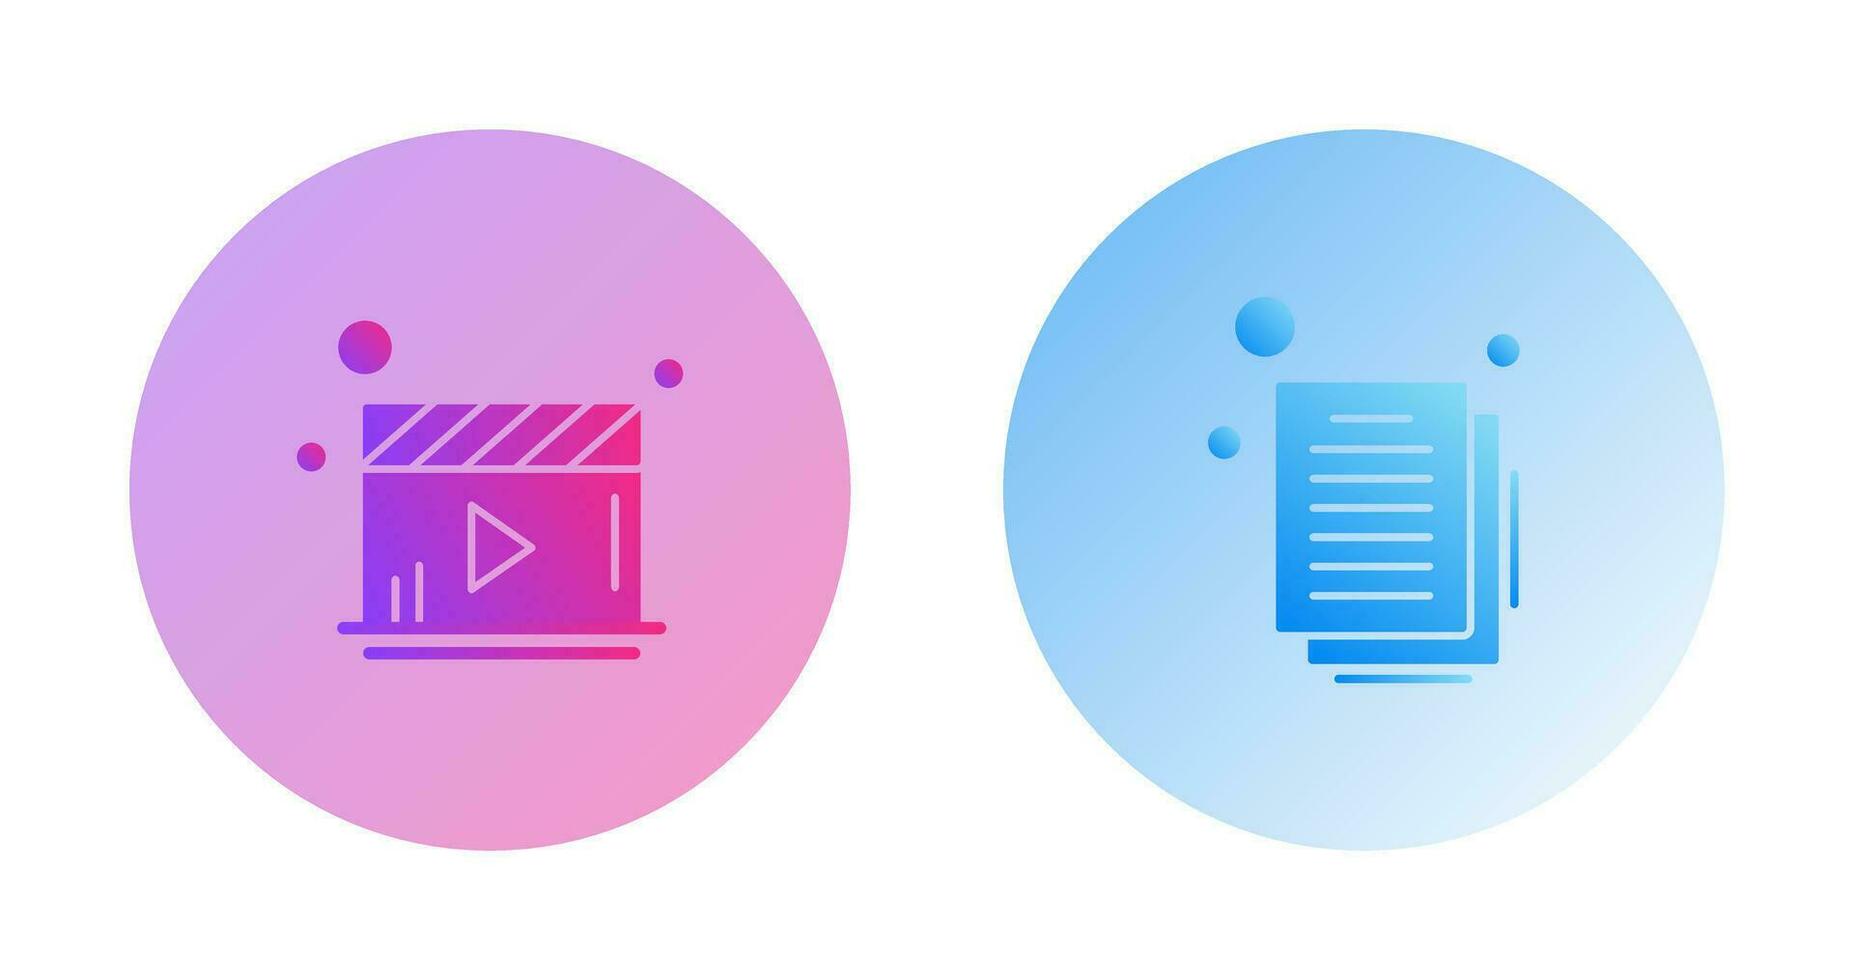 Video Player and Document Icon vector